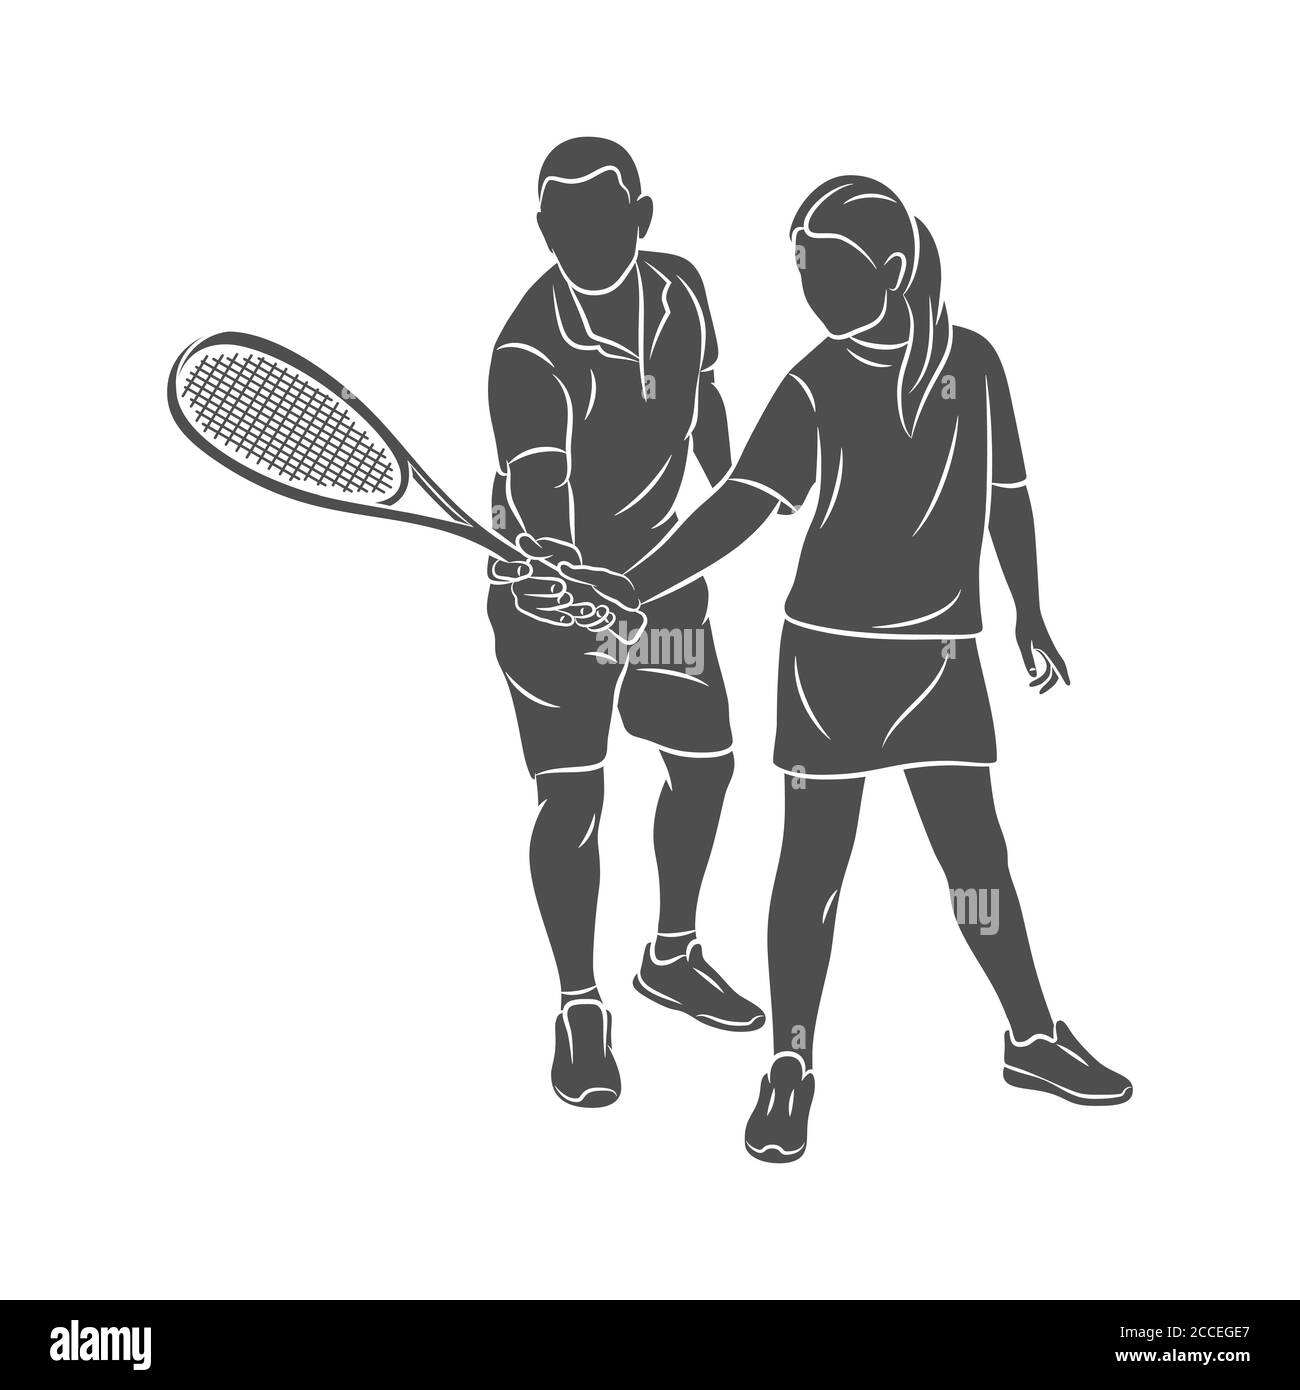 Trainer helps a young woman do an exercise with a racket on her right hand in squash Stock Vector